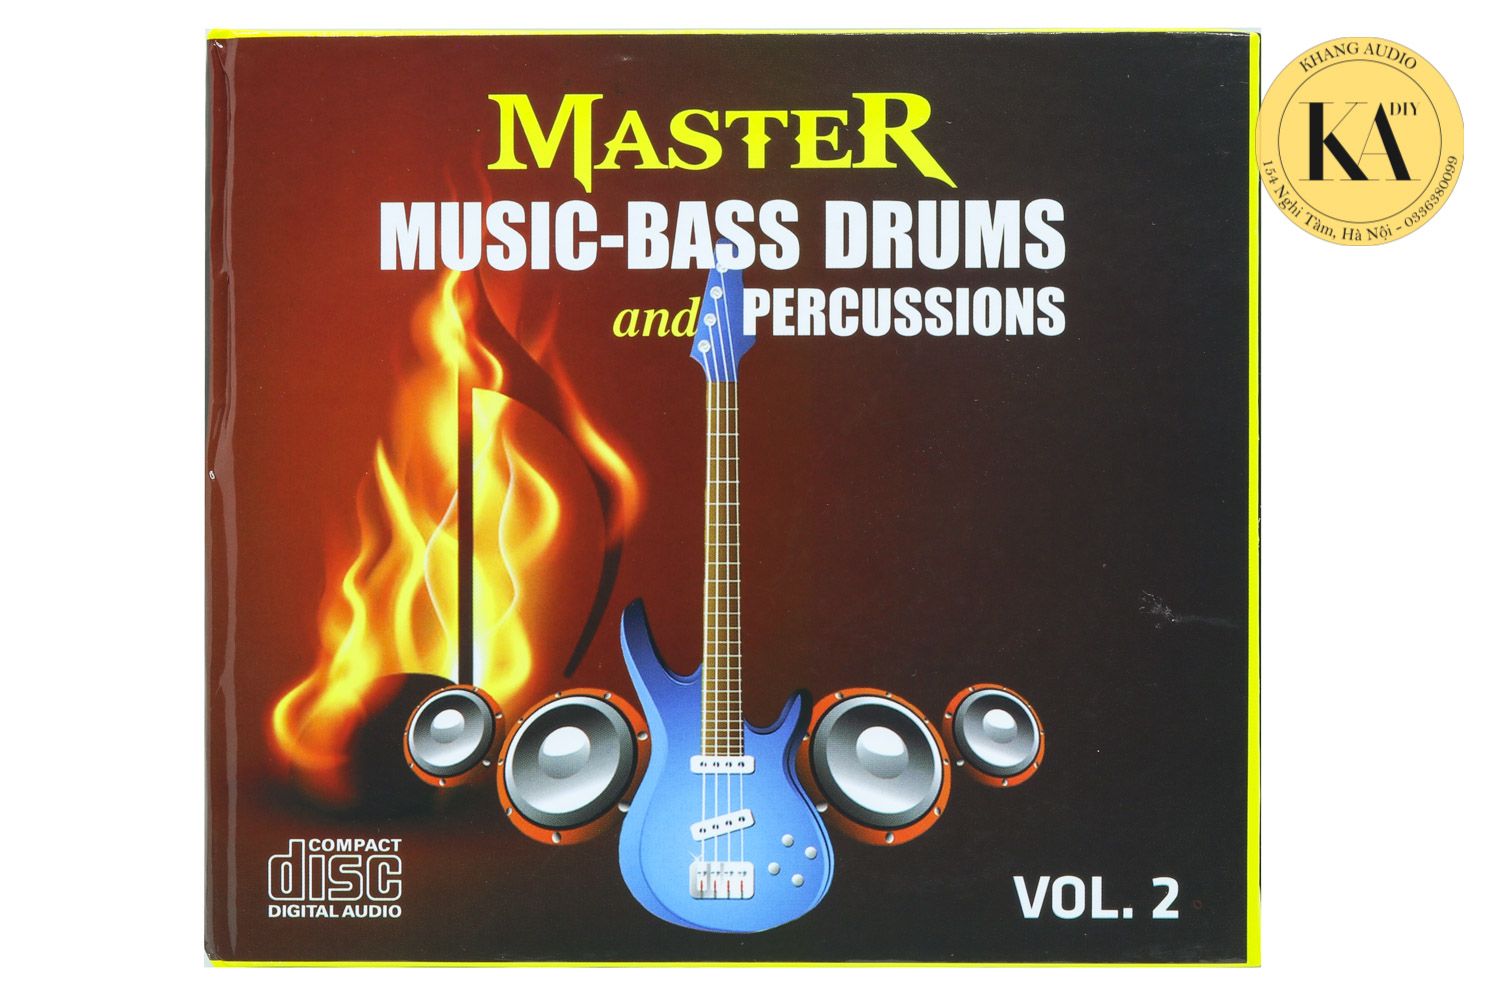 Master Music - Bass Drums and Percussions Vol.2